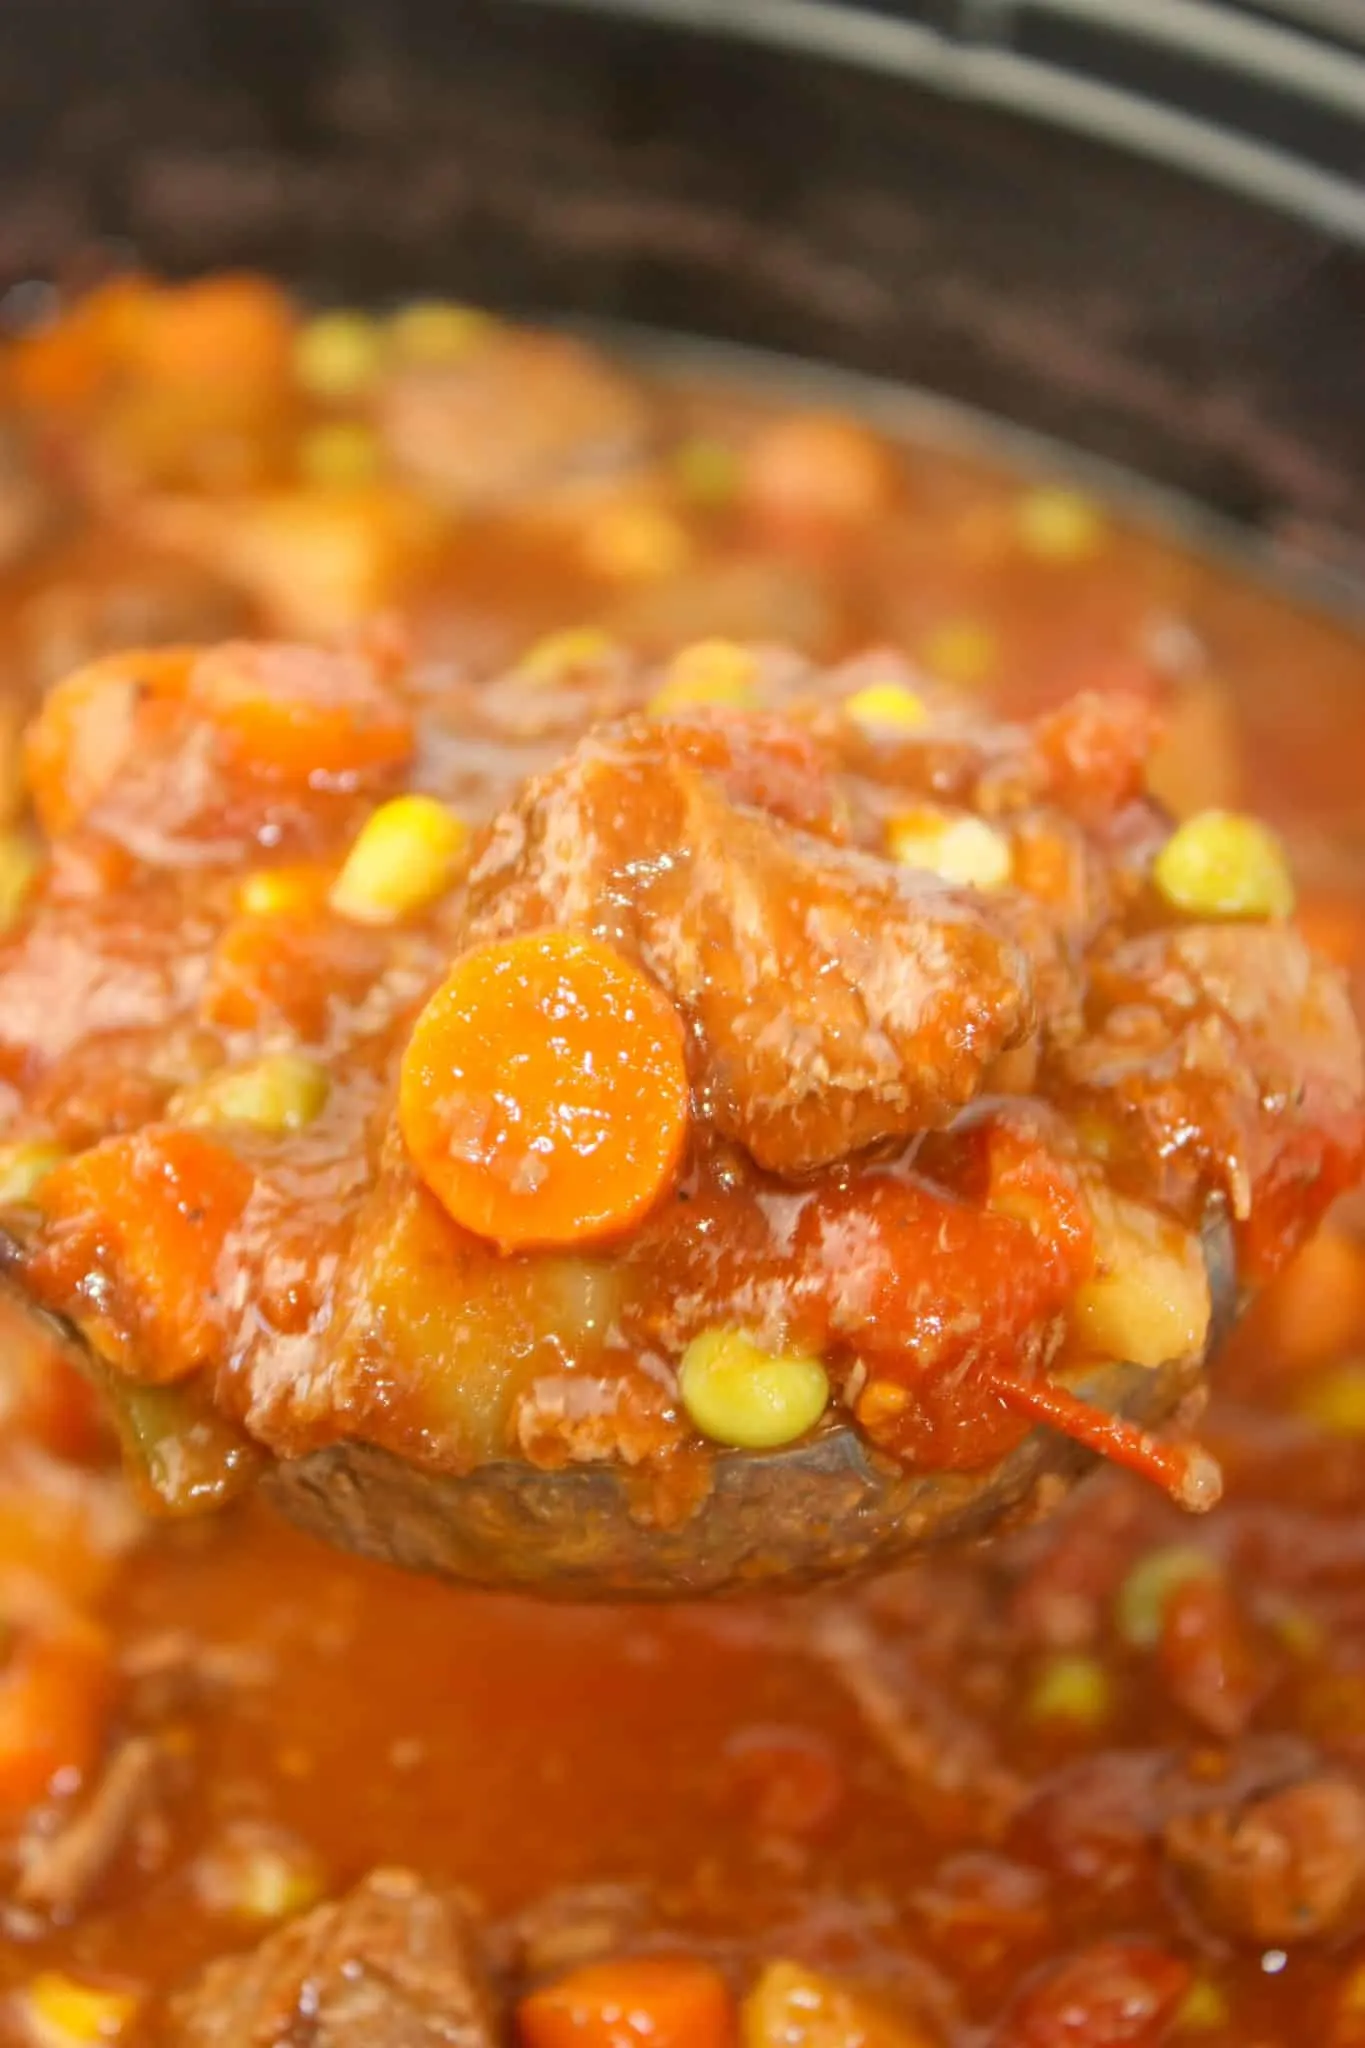 Beef stew is a staple in our home during the cooler months.  This Crock Pot version, of a healthy dinner, is great to come home to at the end of the day.